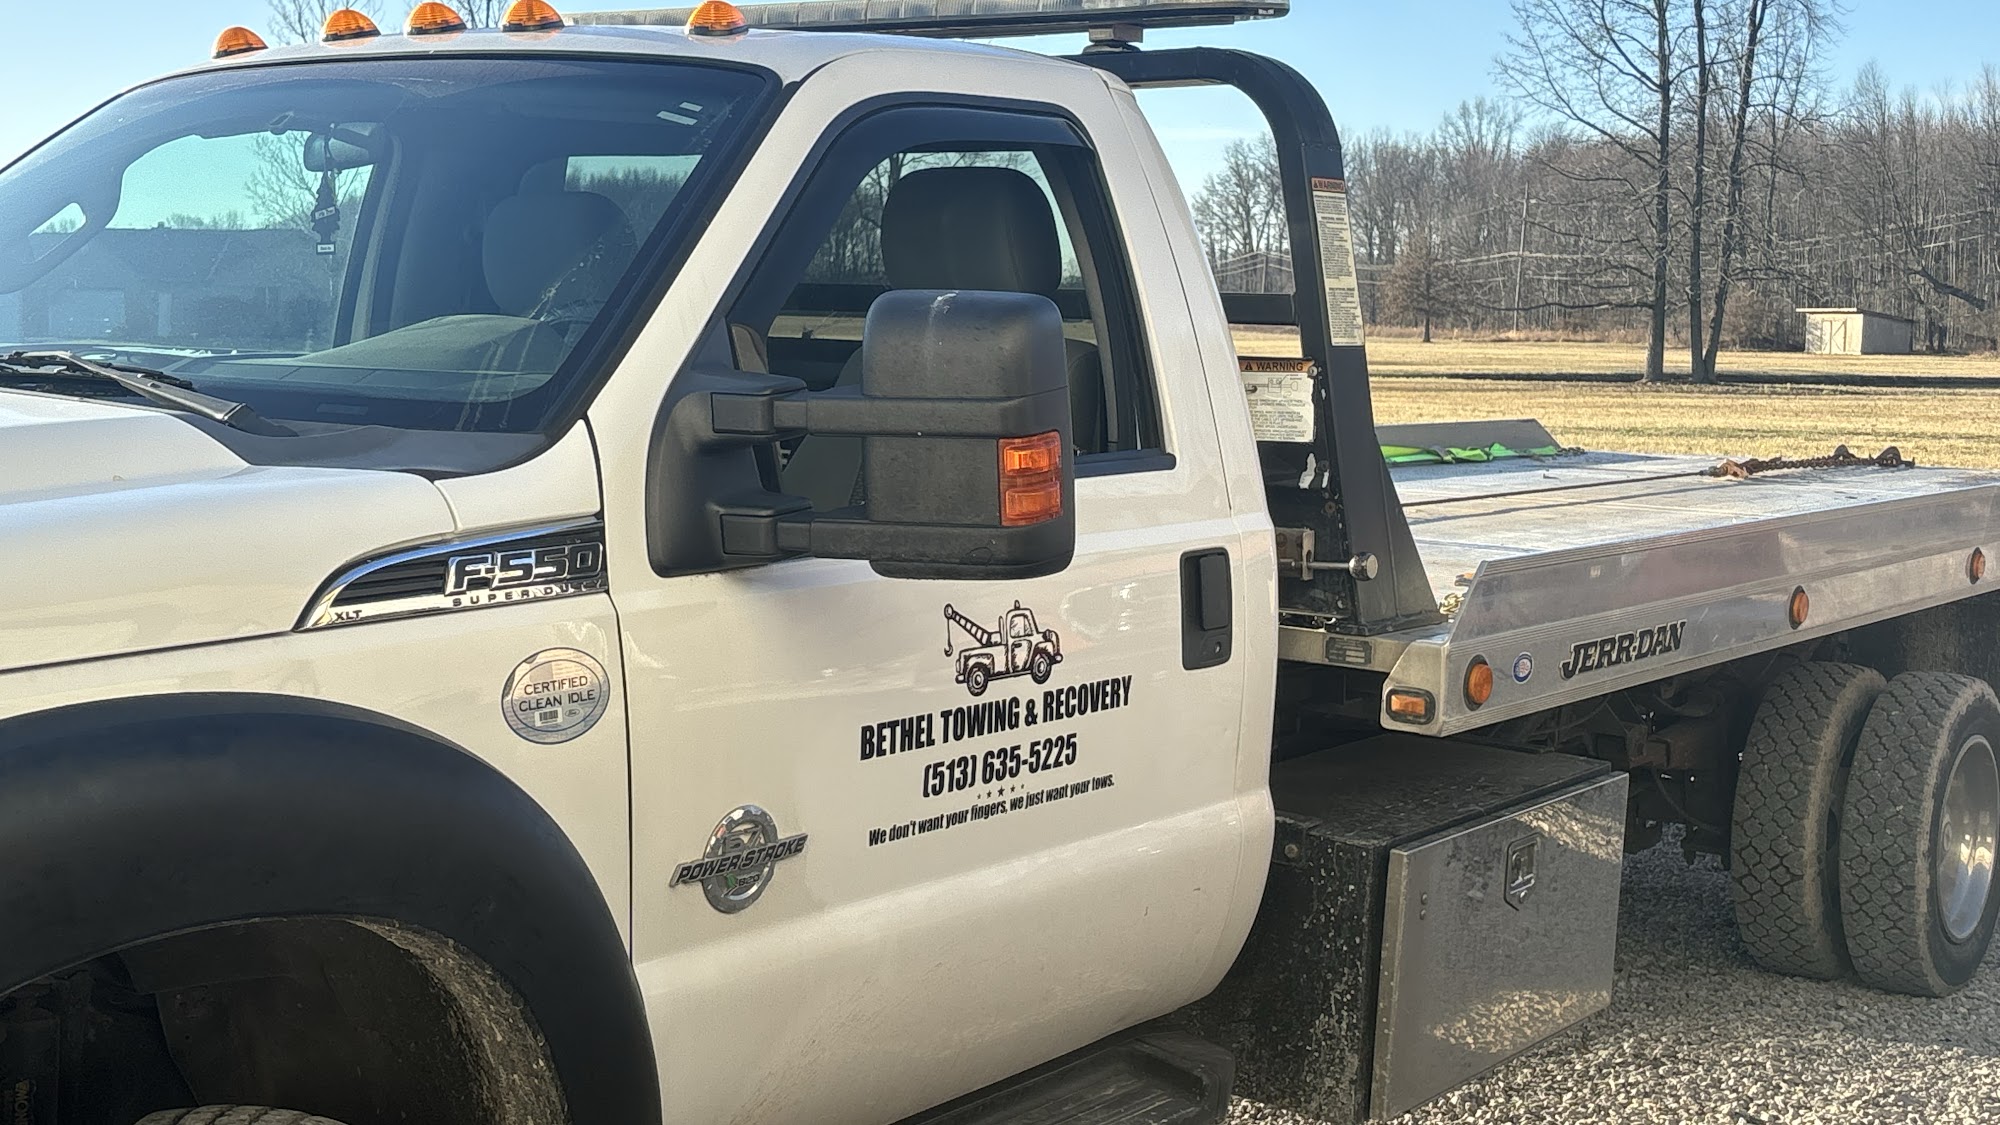 Bethel Towing & Recovery